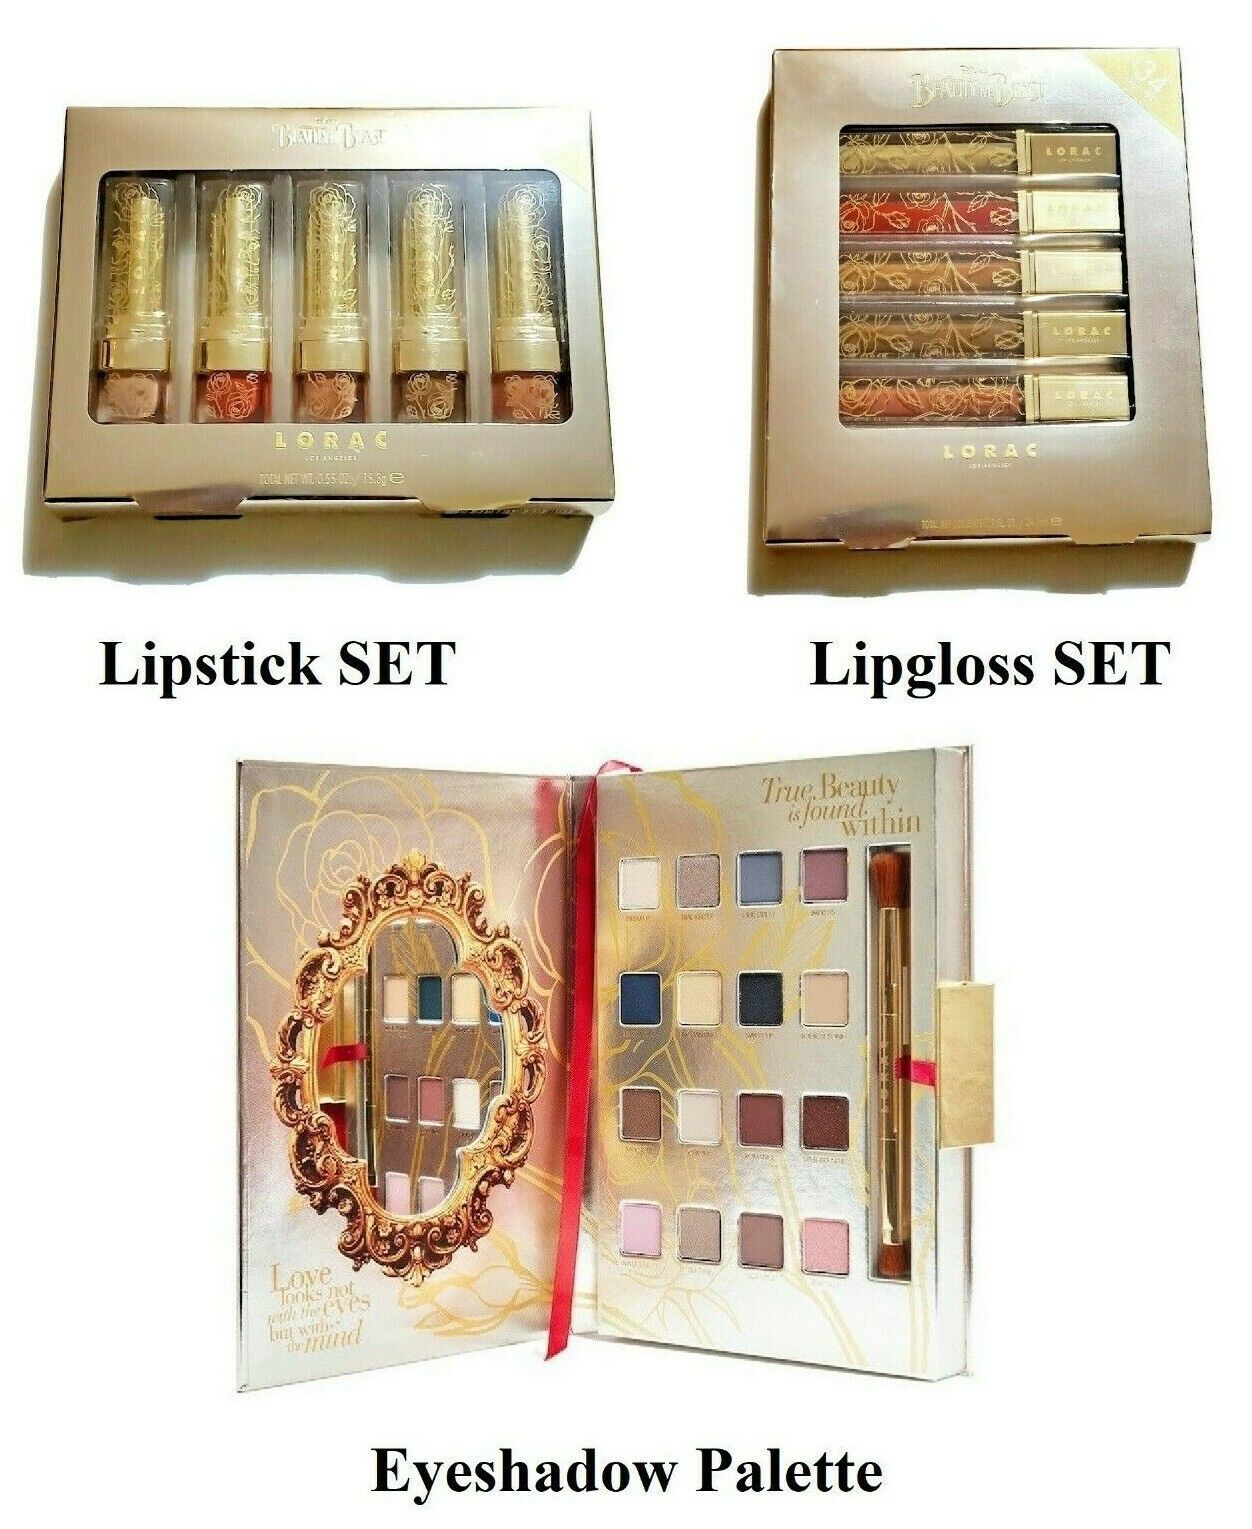 LORAC X Disney's Beauty and the Beast Make Up Collection Set *SEALED* - $33.99 - $104.99